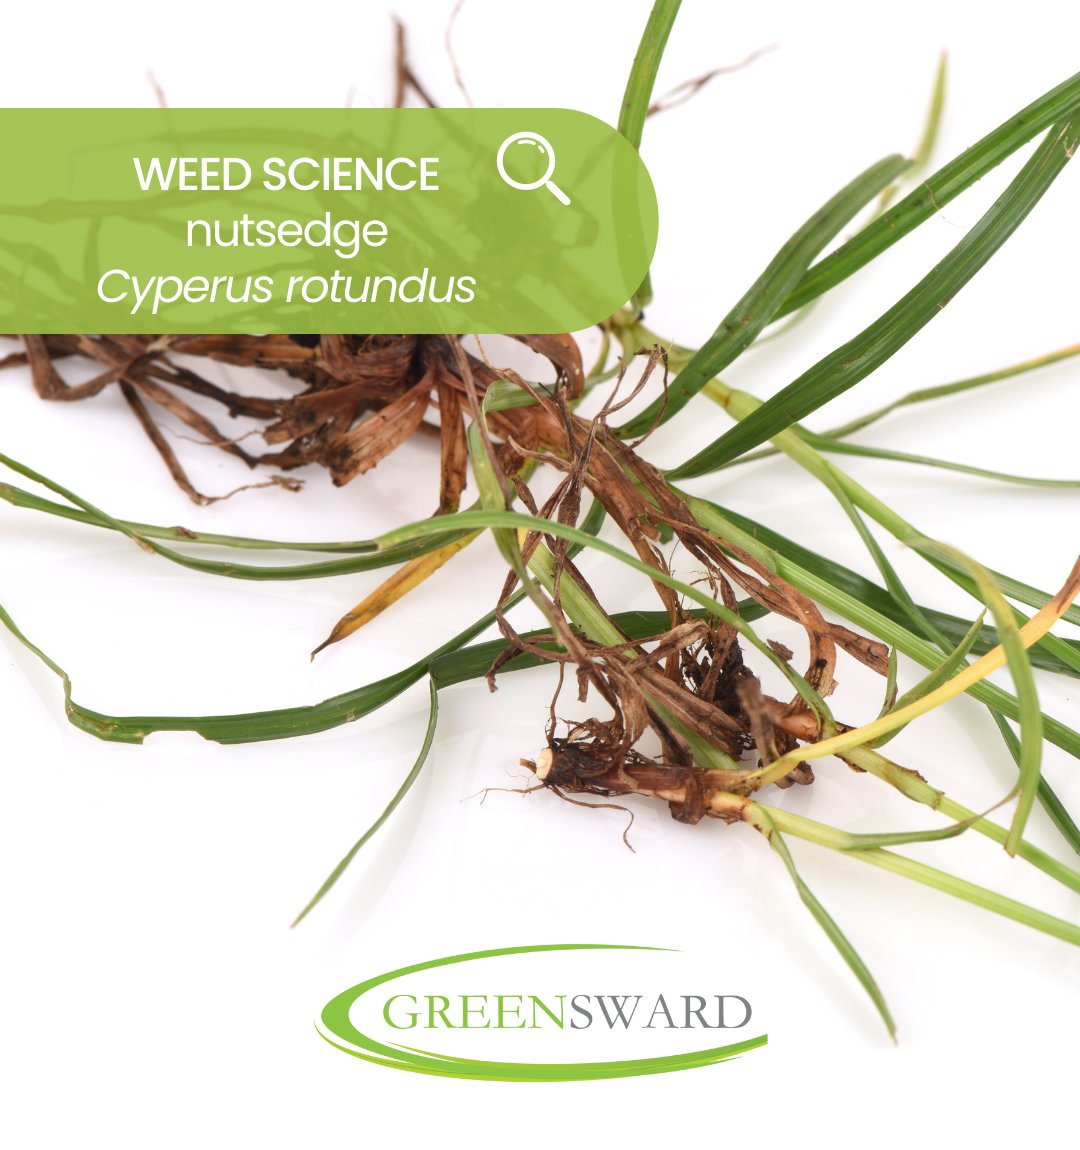 If your lawn has nutsedge, do NOT pull it. Nutsedge roots can grow 6-12” deep. Pull an established plant, and you’ll leave behind the system of 'nuts,' which will be triggered to multiply. You’ll have more nutsedge very quickly. 

We can help! Just call.

#keepitgreen 🌱